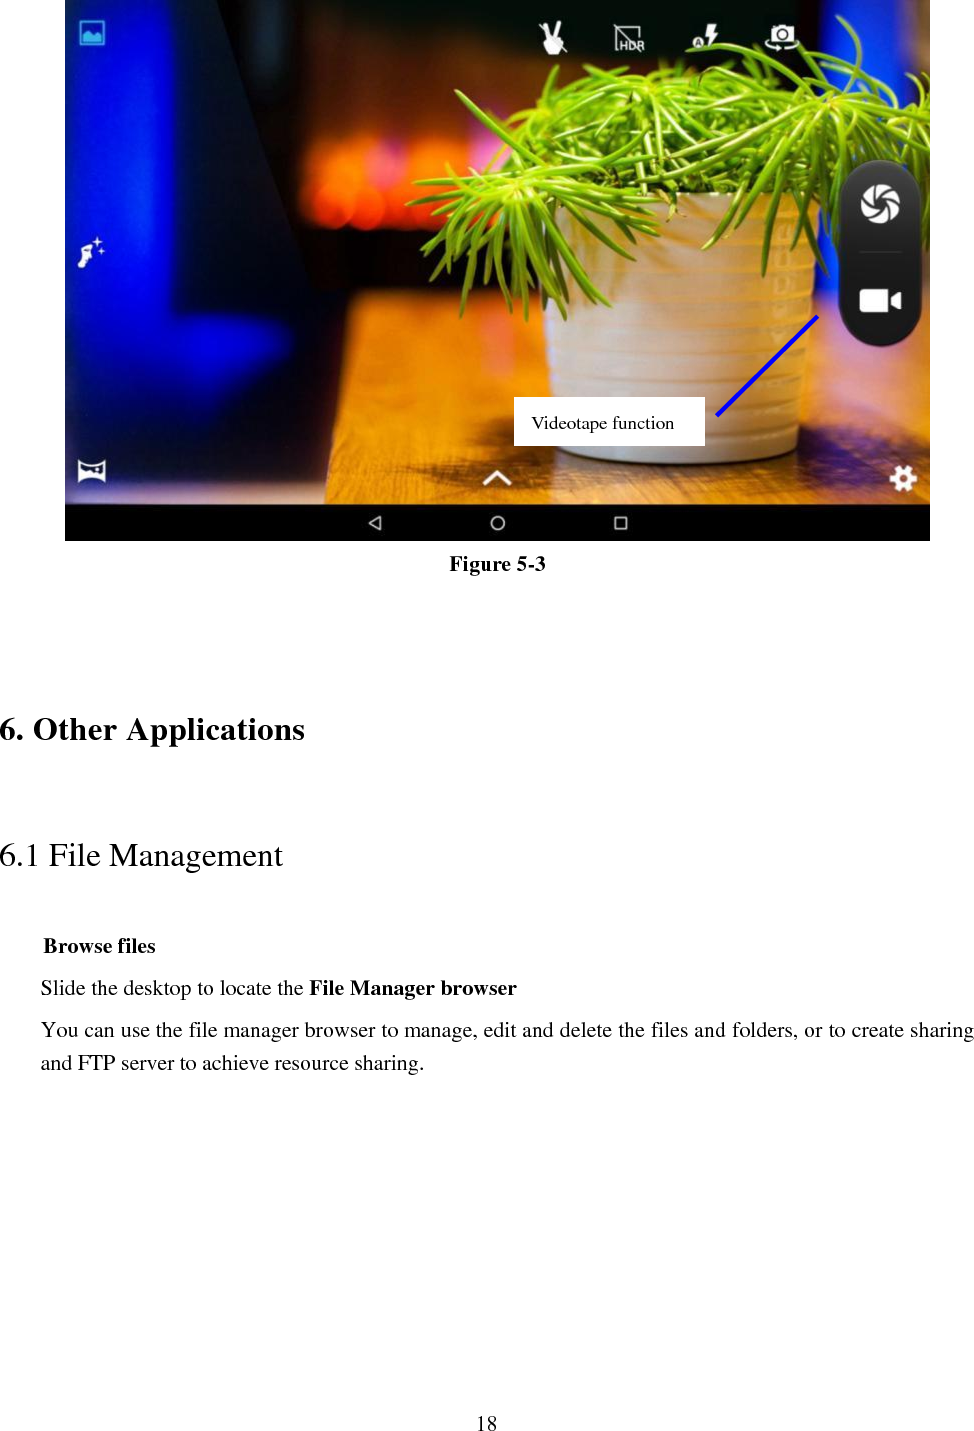  18  Figure 5-3  6. Other Applications 6.1 File Management     Browse files Slide the desktop to locate the File Manager browser You can use the file manager browser to manage, edit and delete the files and folders, or to create sharing and FTP server to achieve resource sharing. Videotape function 